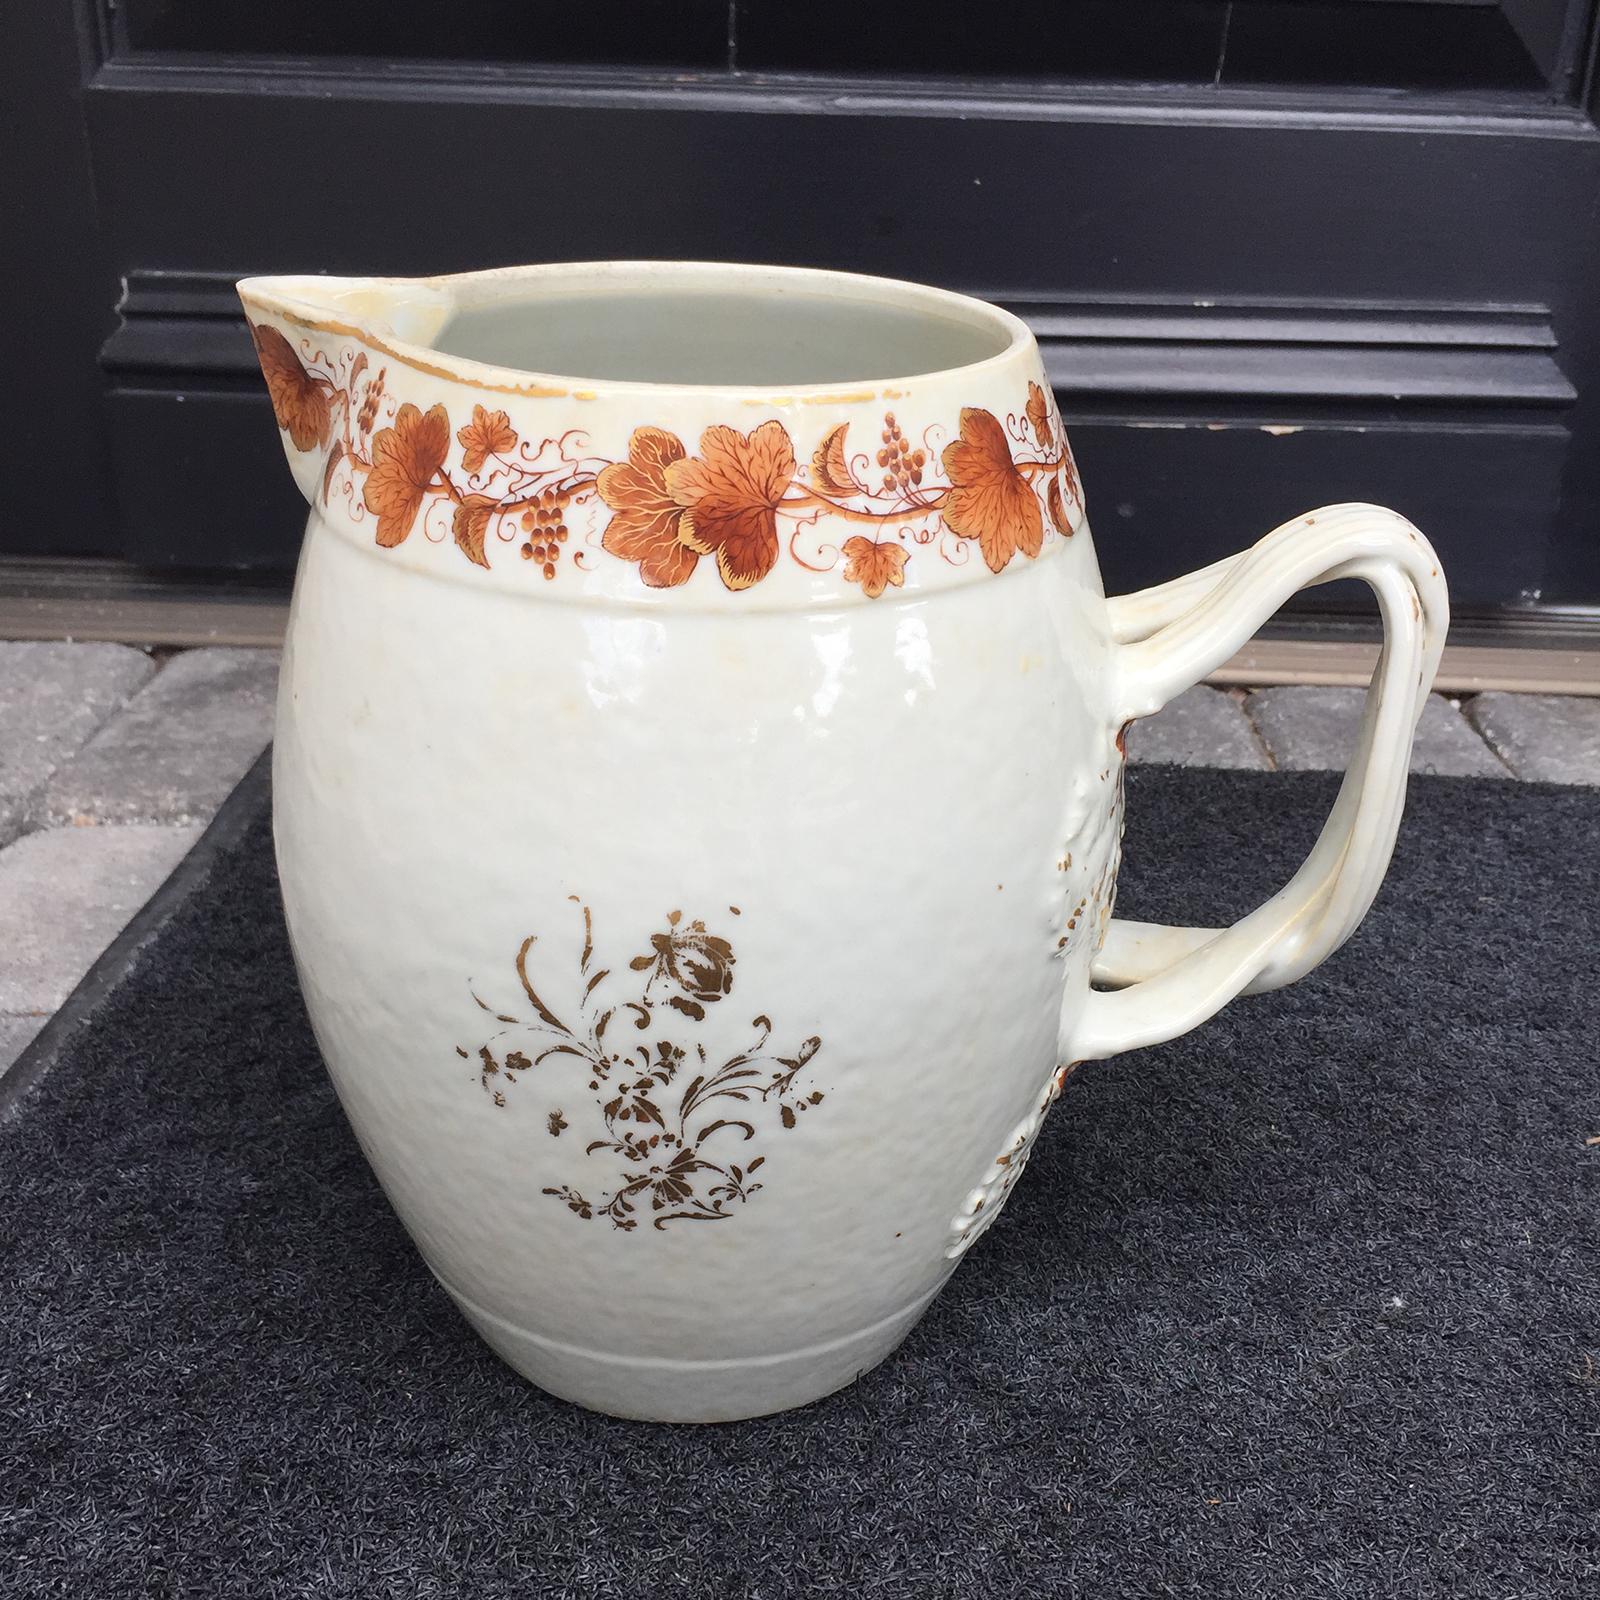 Early 19th Century circa 1800 Chinese Export Porcelain Pitcher In Good Condition For Sale In Atlanta, GA